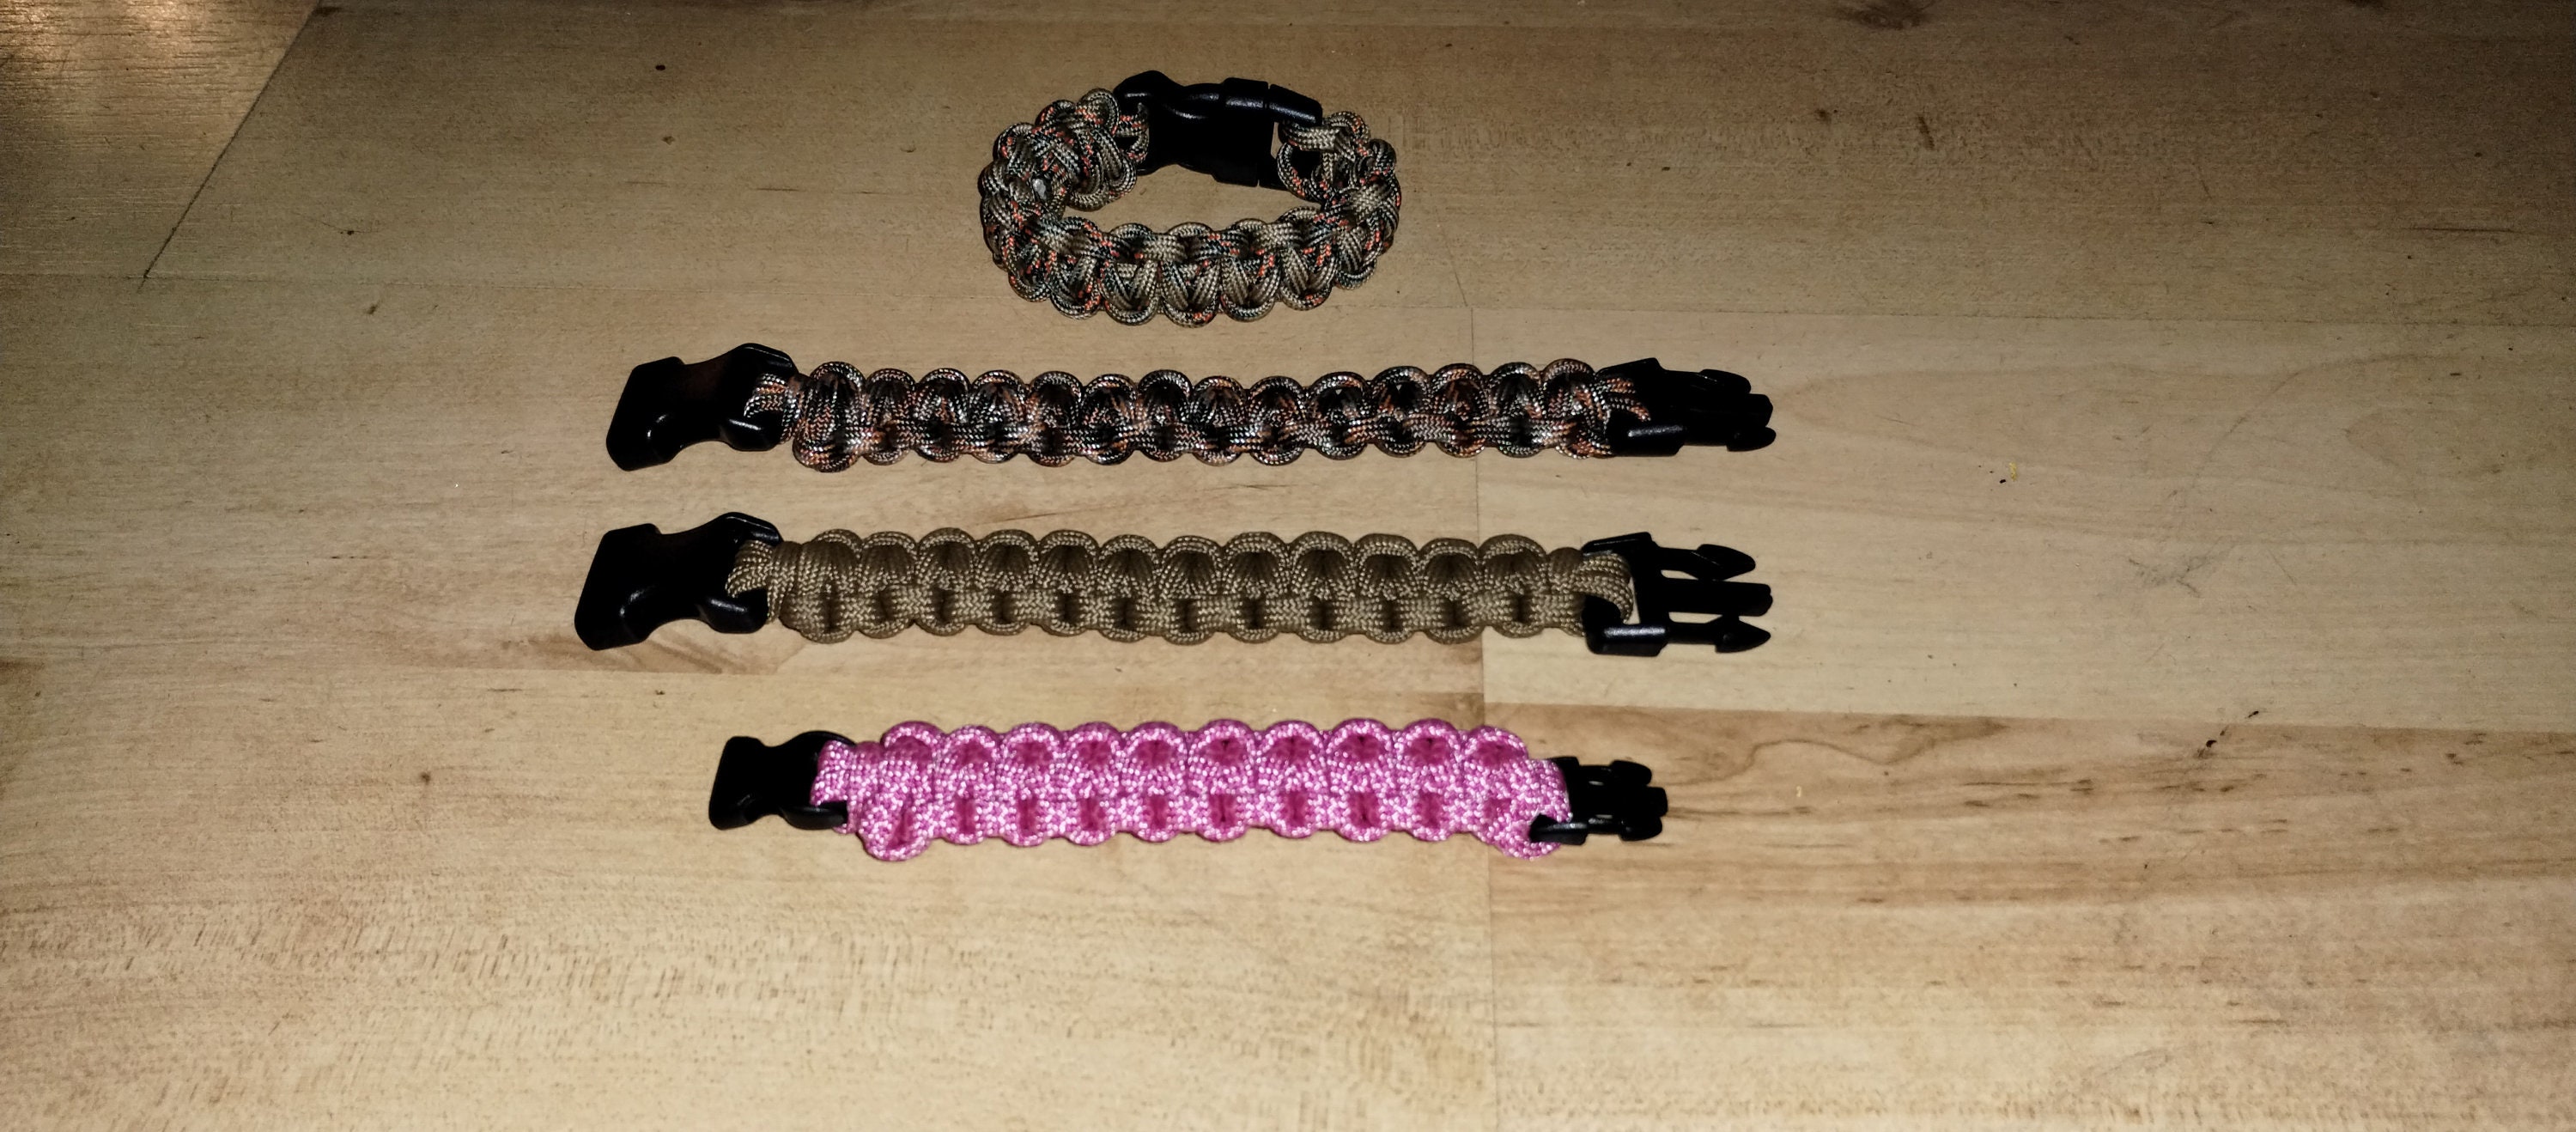 Dragon's Teeth Paracord Bracelet : 4 Steps (with Pictures) - Instructables